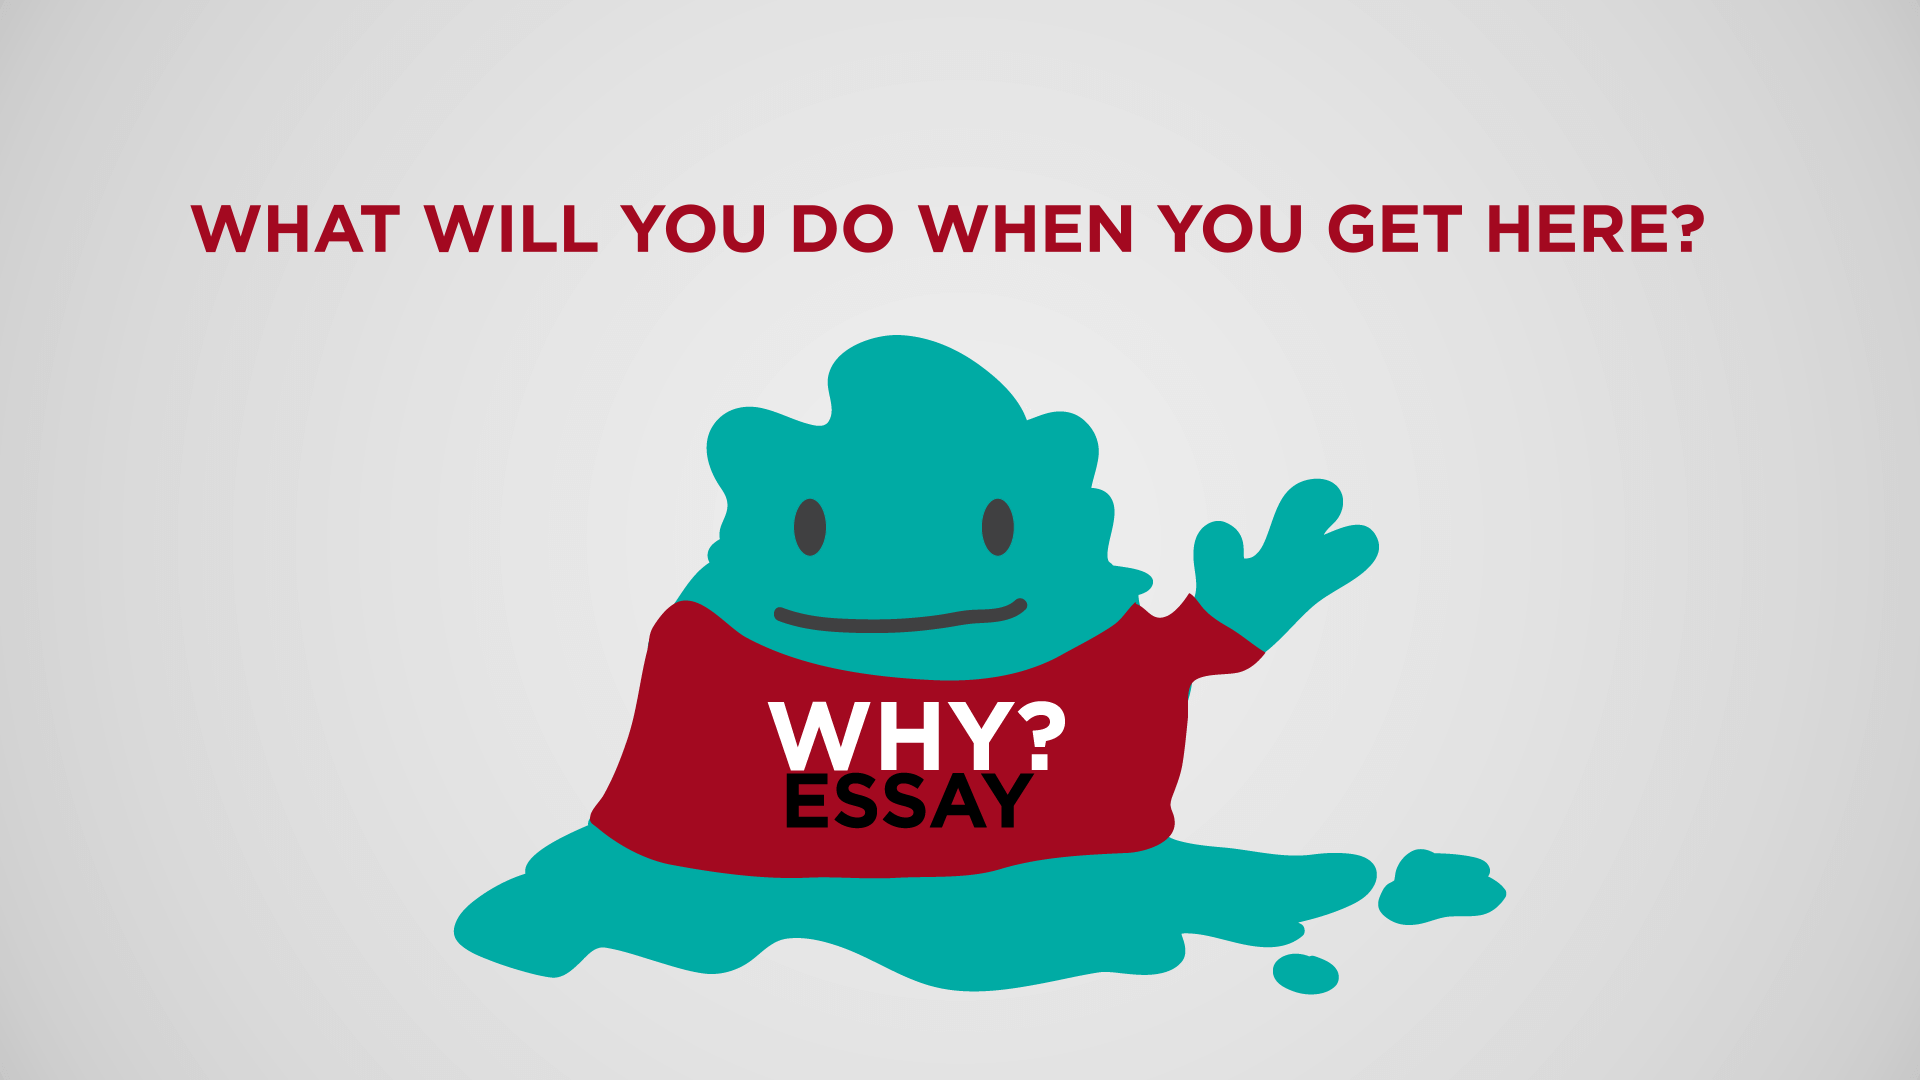 How to Write a Powerful “Why Do You Want to Go Here?” Essay (The Why Essay)